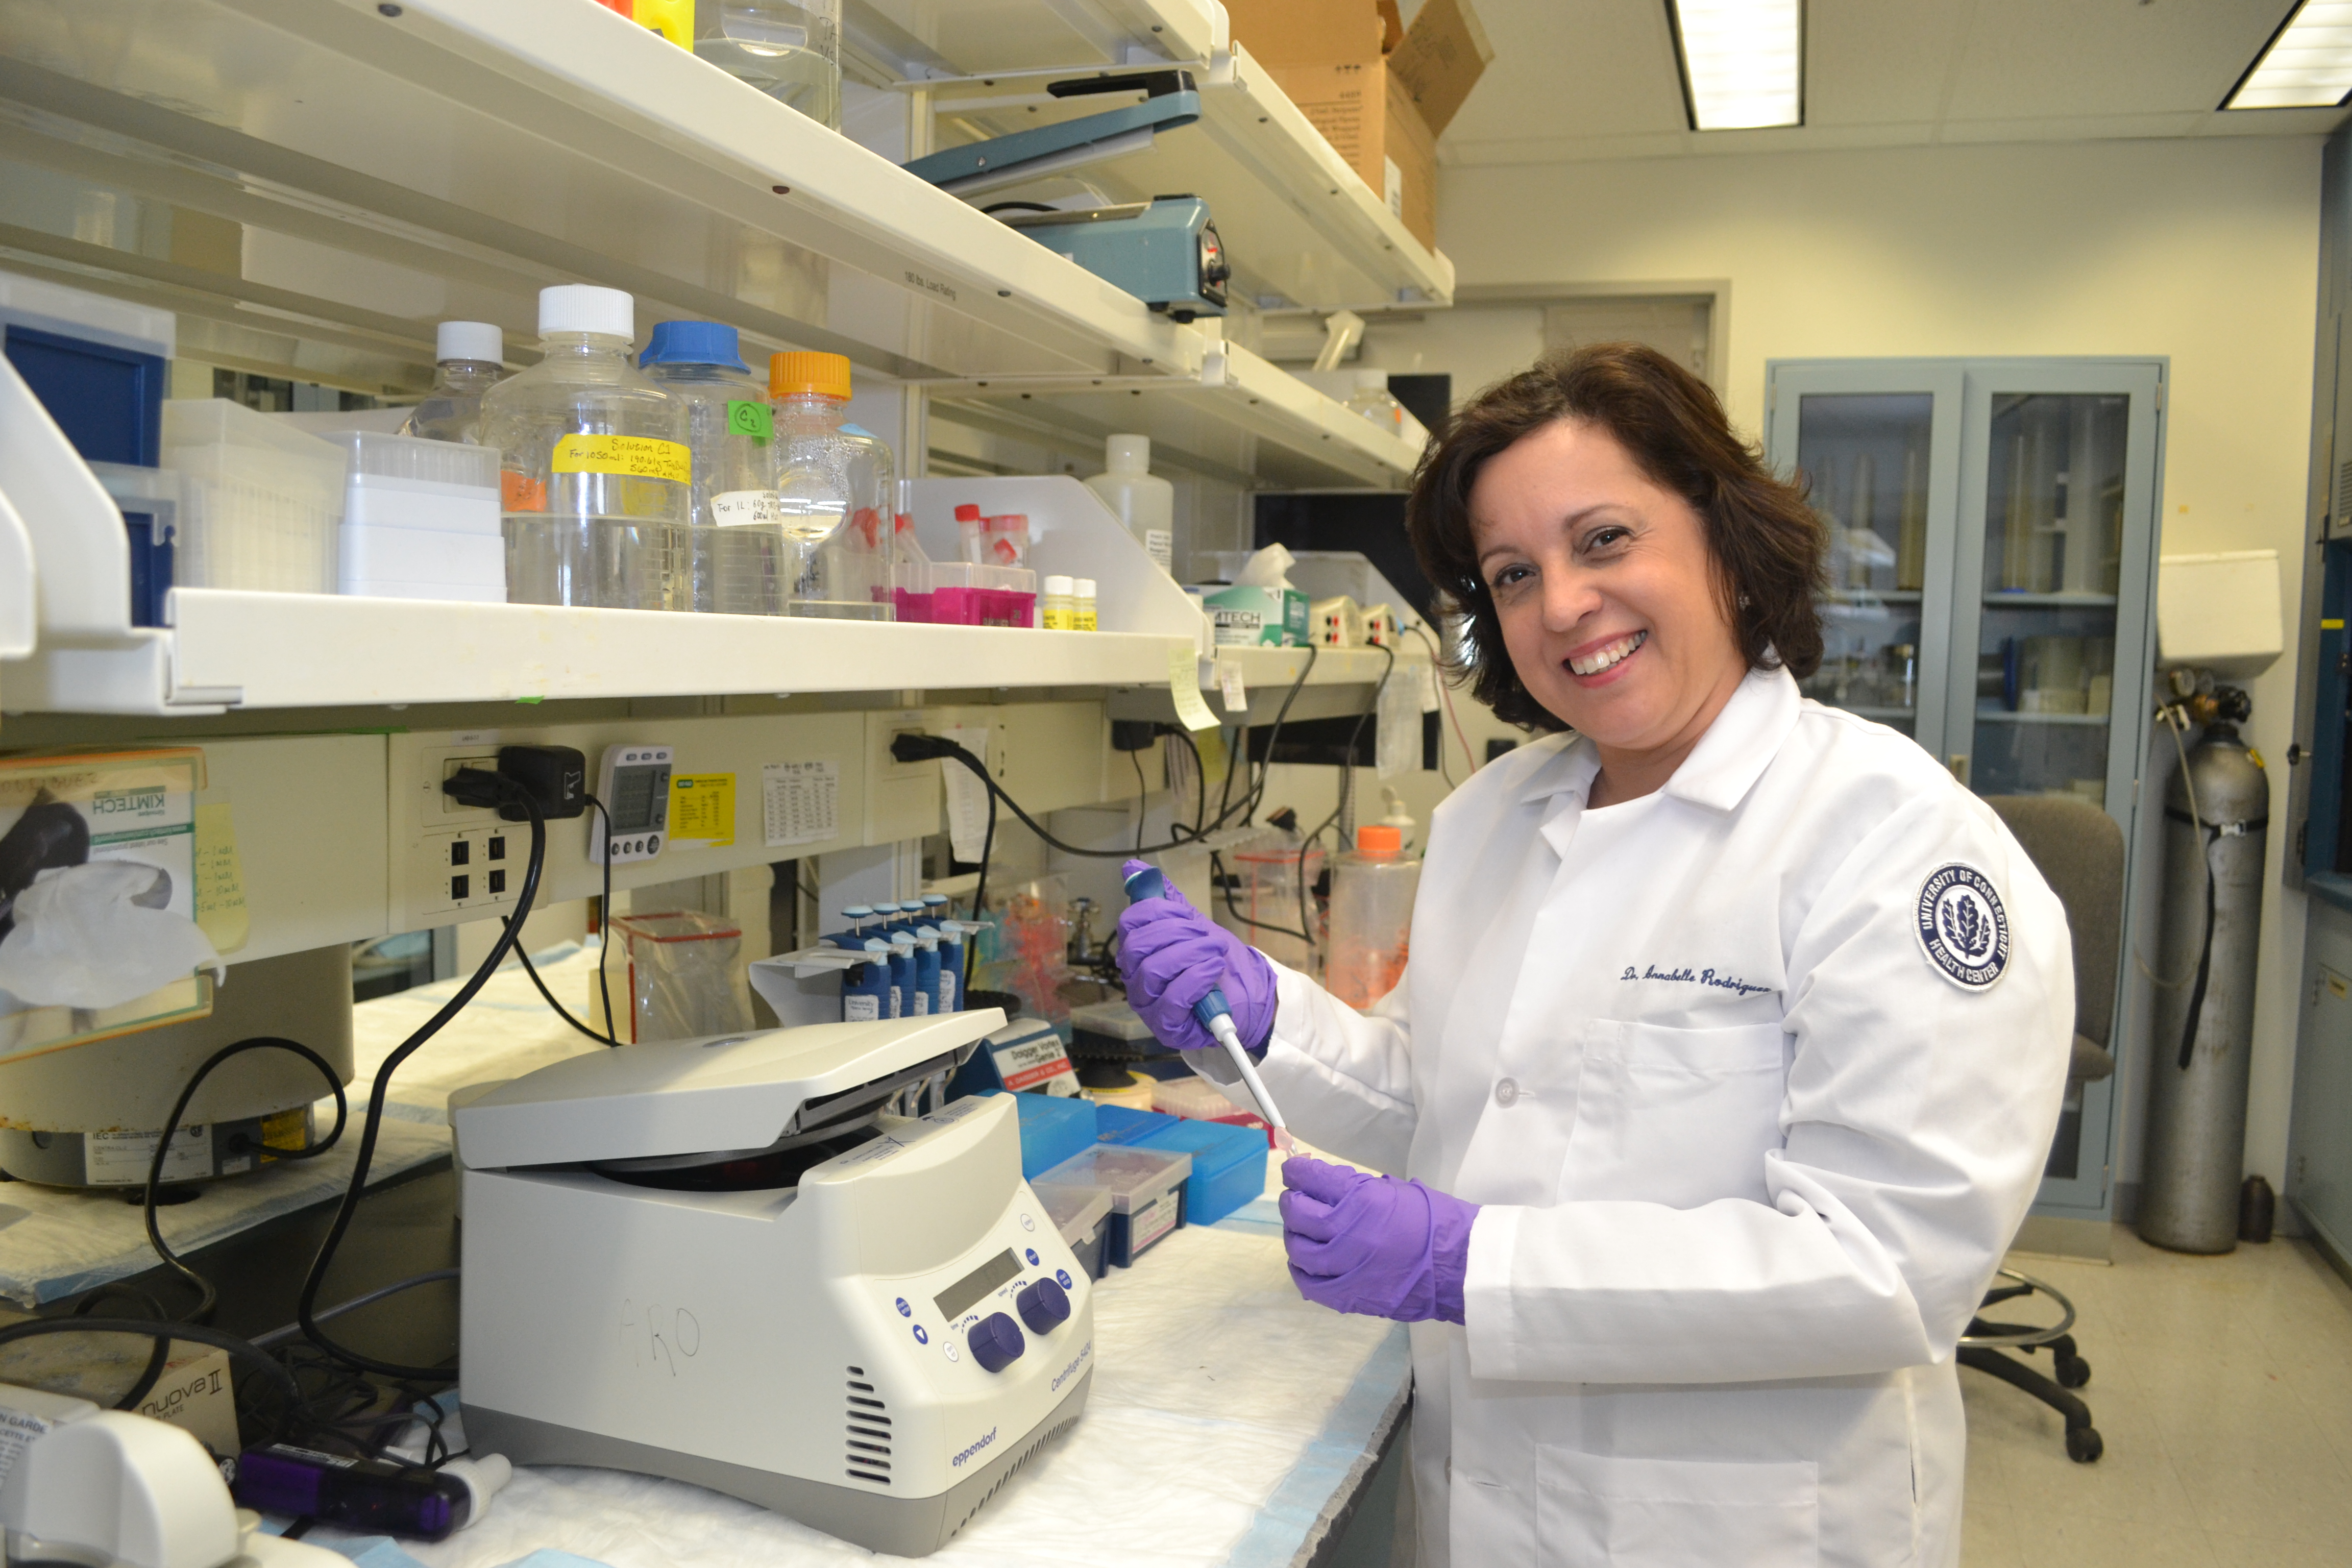 Annabelle Rodriguez-Oquendo, Linda and David Roth Chair in Cardiovascular Research at the School of Medicine, is one of seven faculty researchers at UConn or UConn Health who have bene named members of the Connecticut Academy of Science and Engineering. (Tina Encarnacion/UConn Health Center File Photo)